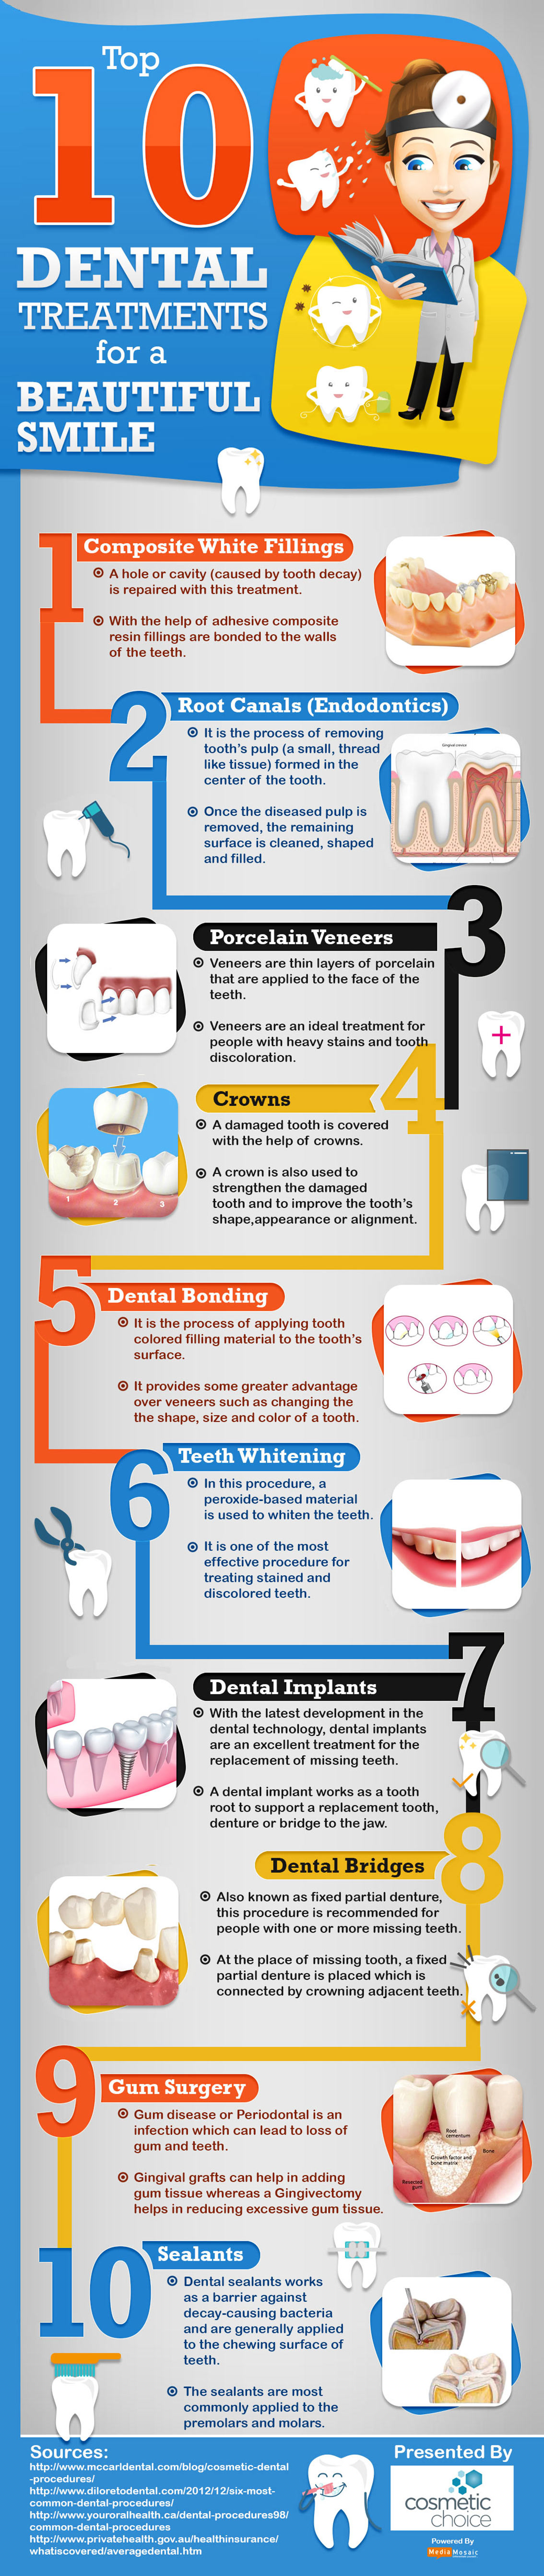 Dental Procedures for a Beautiful Smile Infographic